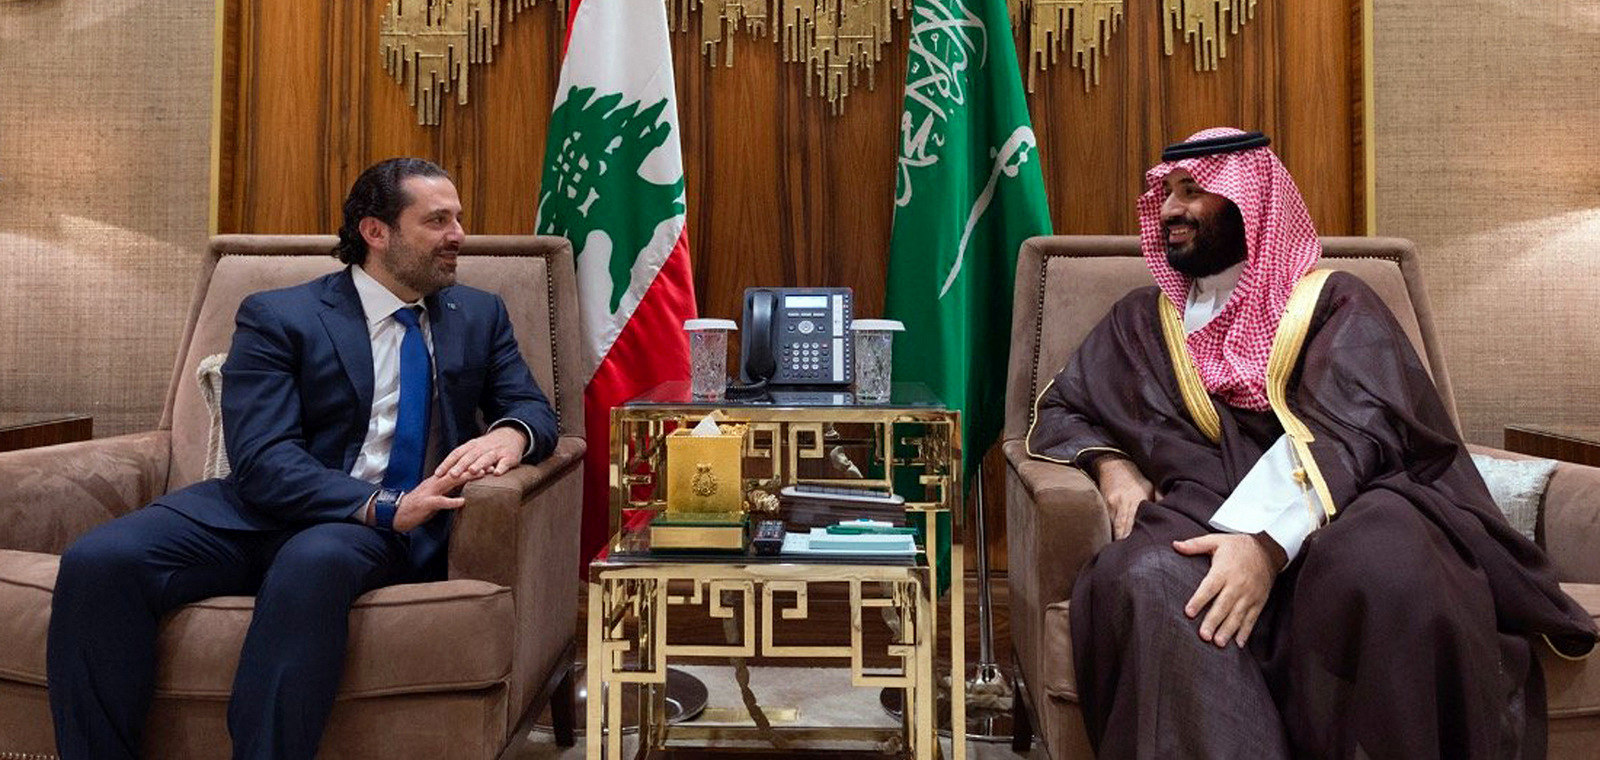 In this photo released on Monday, Oct. 30, 2017 by Lebanon's official government photographer Dalati Nohra, showing Saudi Crown Prince Mohammed bin Salman, right, meets with Lebanese Prime Minister Saad Hariri in Riyadh, Saudi Arabia. Hariri resigned from his post Saturday, Nov. 4, 2017 during a trip to Saudi Arabia in a surprise move that plunged the country into uncertainty amid heightened regional tensions. (Dalati Nohra via AP)